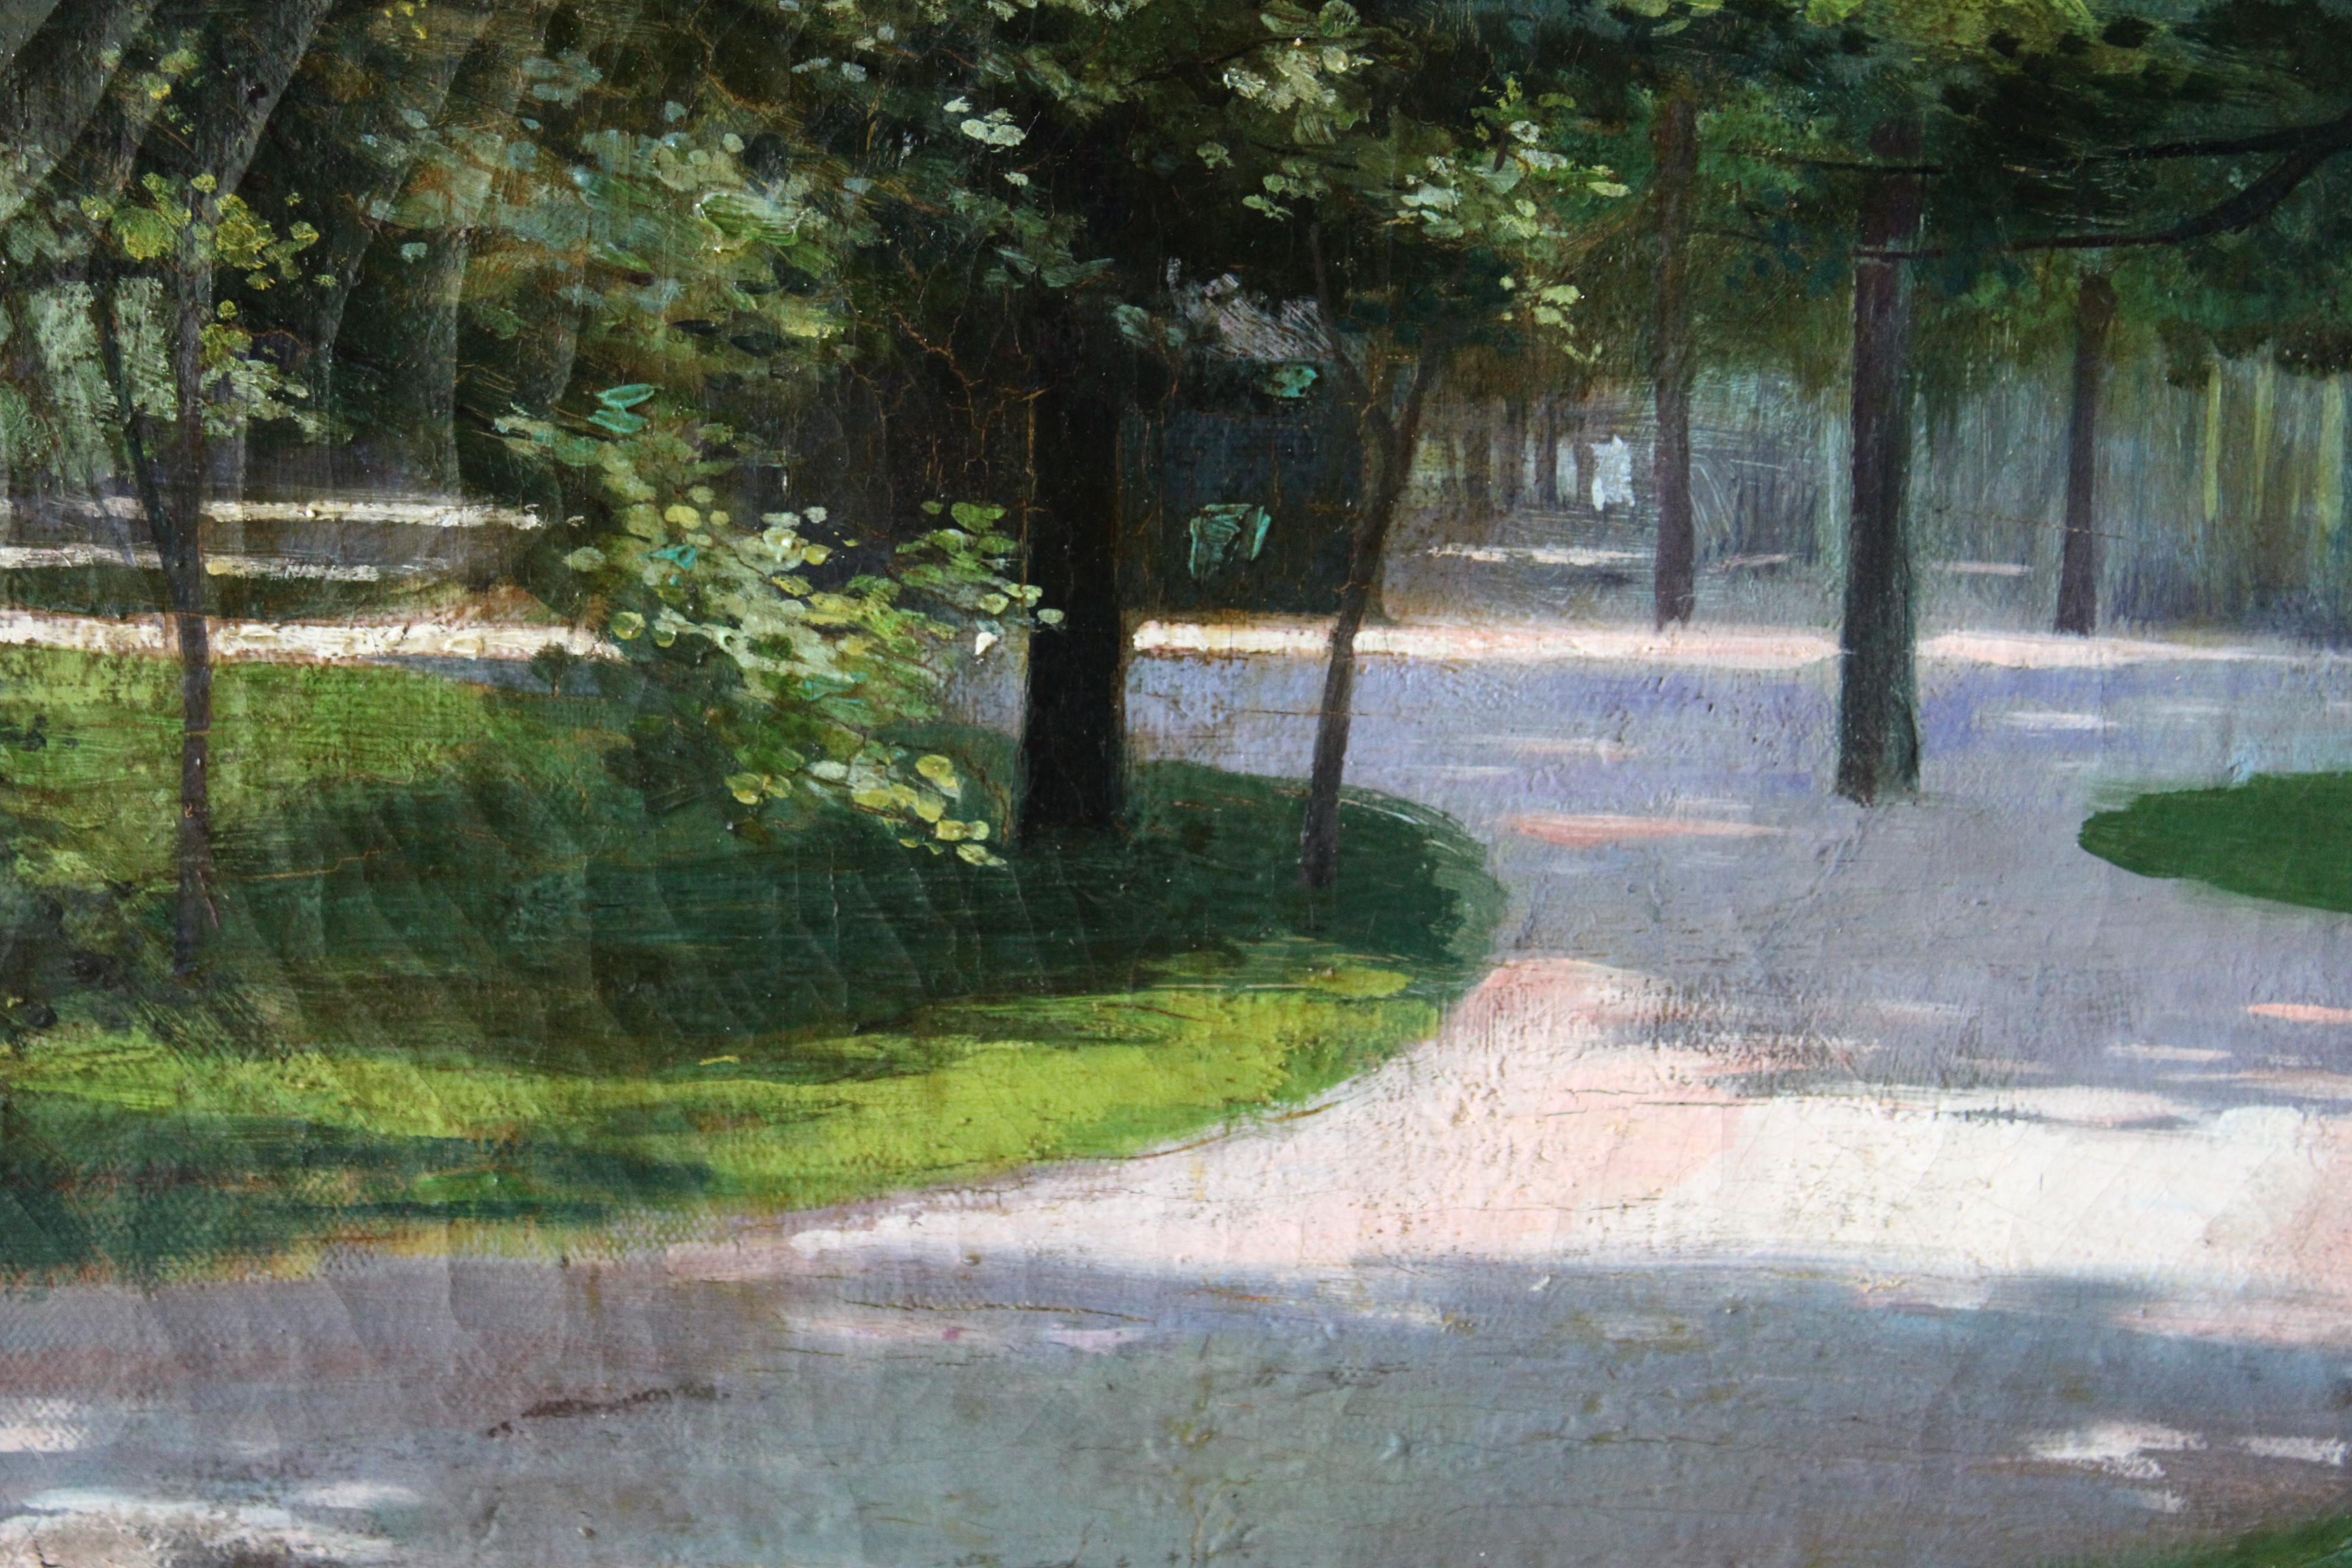 Park Pathway dated 1892

Atmospheric old oil painting on canvas dated 1892. This gorgeous old wooded parkland painting with a sunlight highlighted pathway is quite magical.  The dark trees of the park are brought to life by the sunlit pathway in